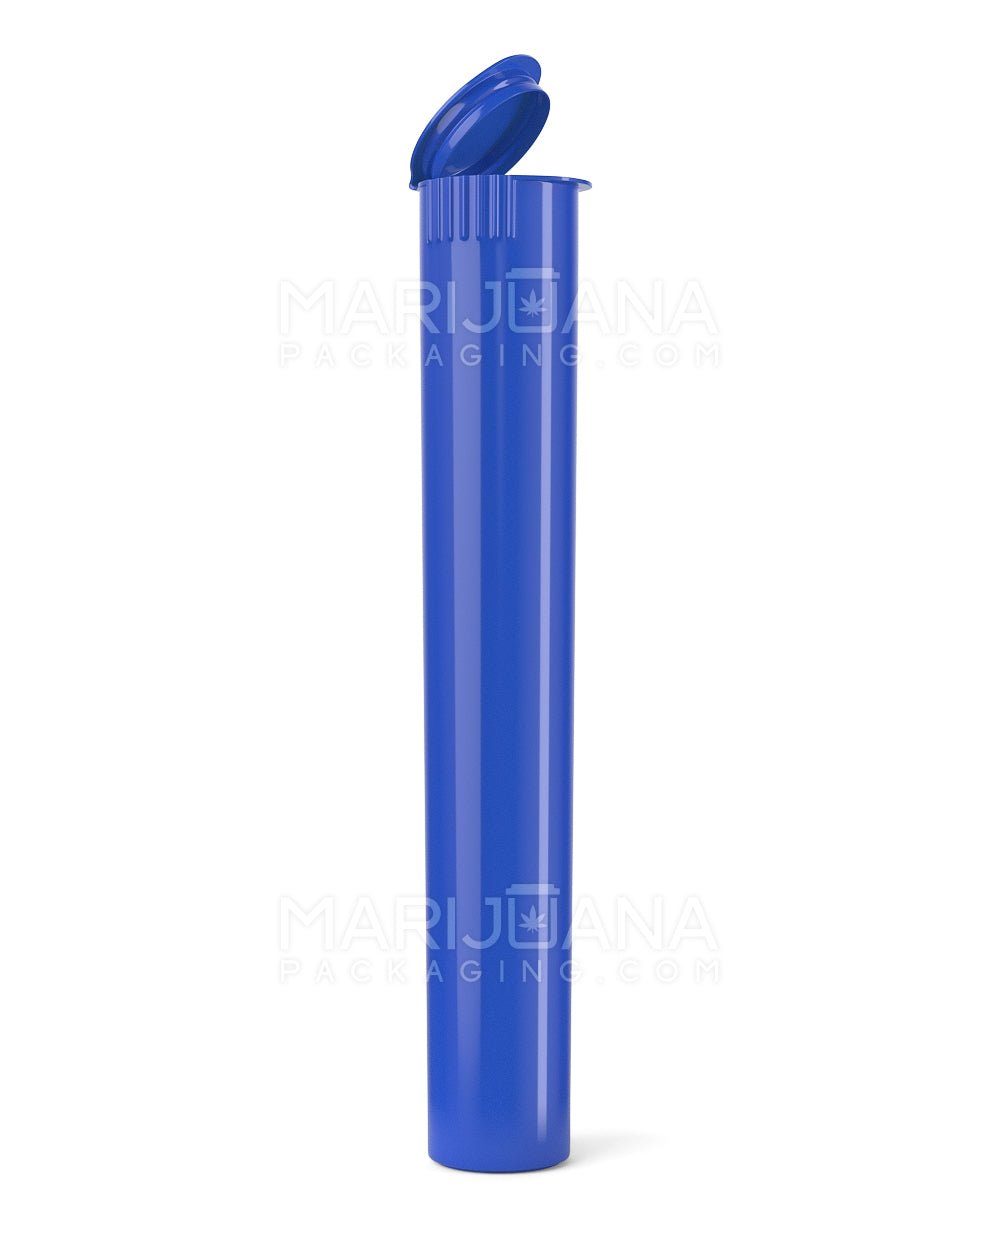 Child Resistant | King Size Pop Top Opaque Plastic Pre-Roll Tubes | 116mm - Blue - 1000 Count - 1